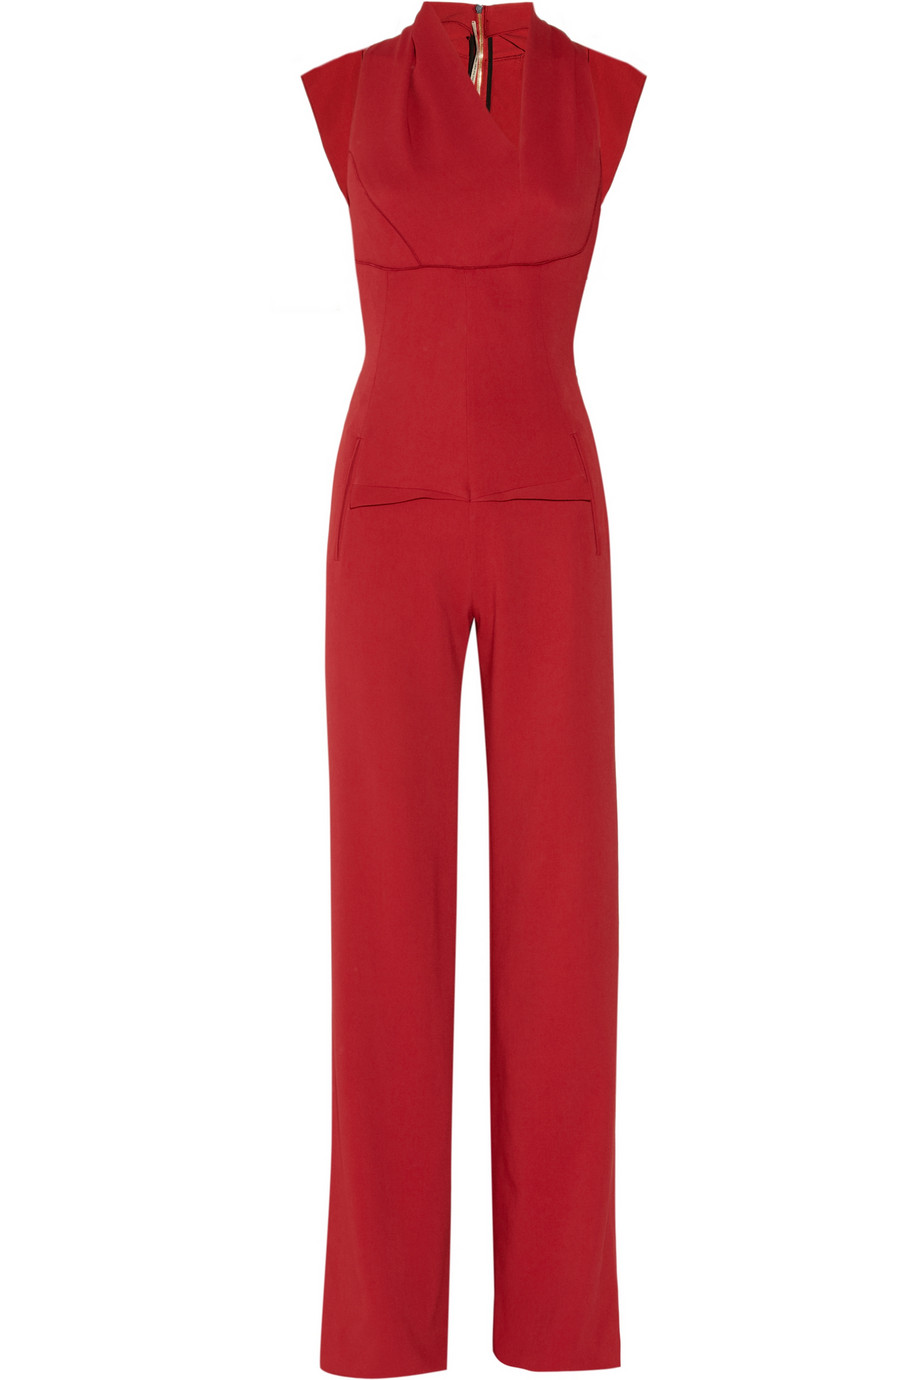 Roland Mouret Crepe Jumpsuit in Red - Lyst